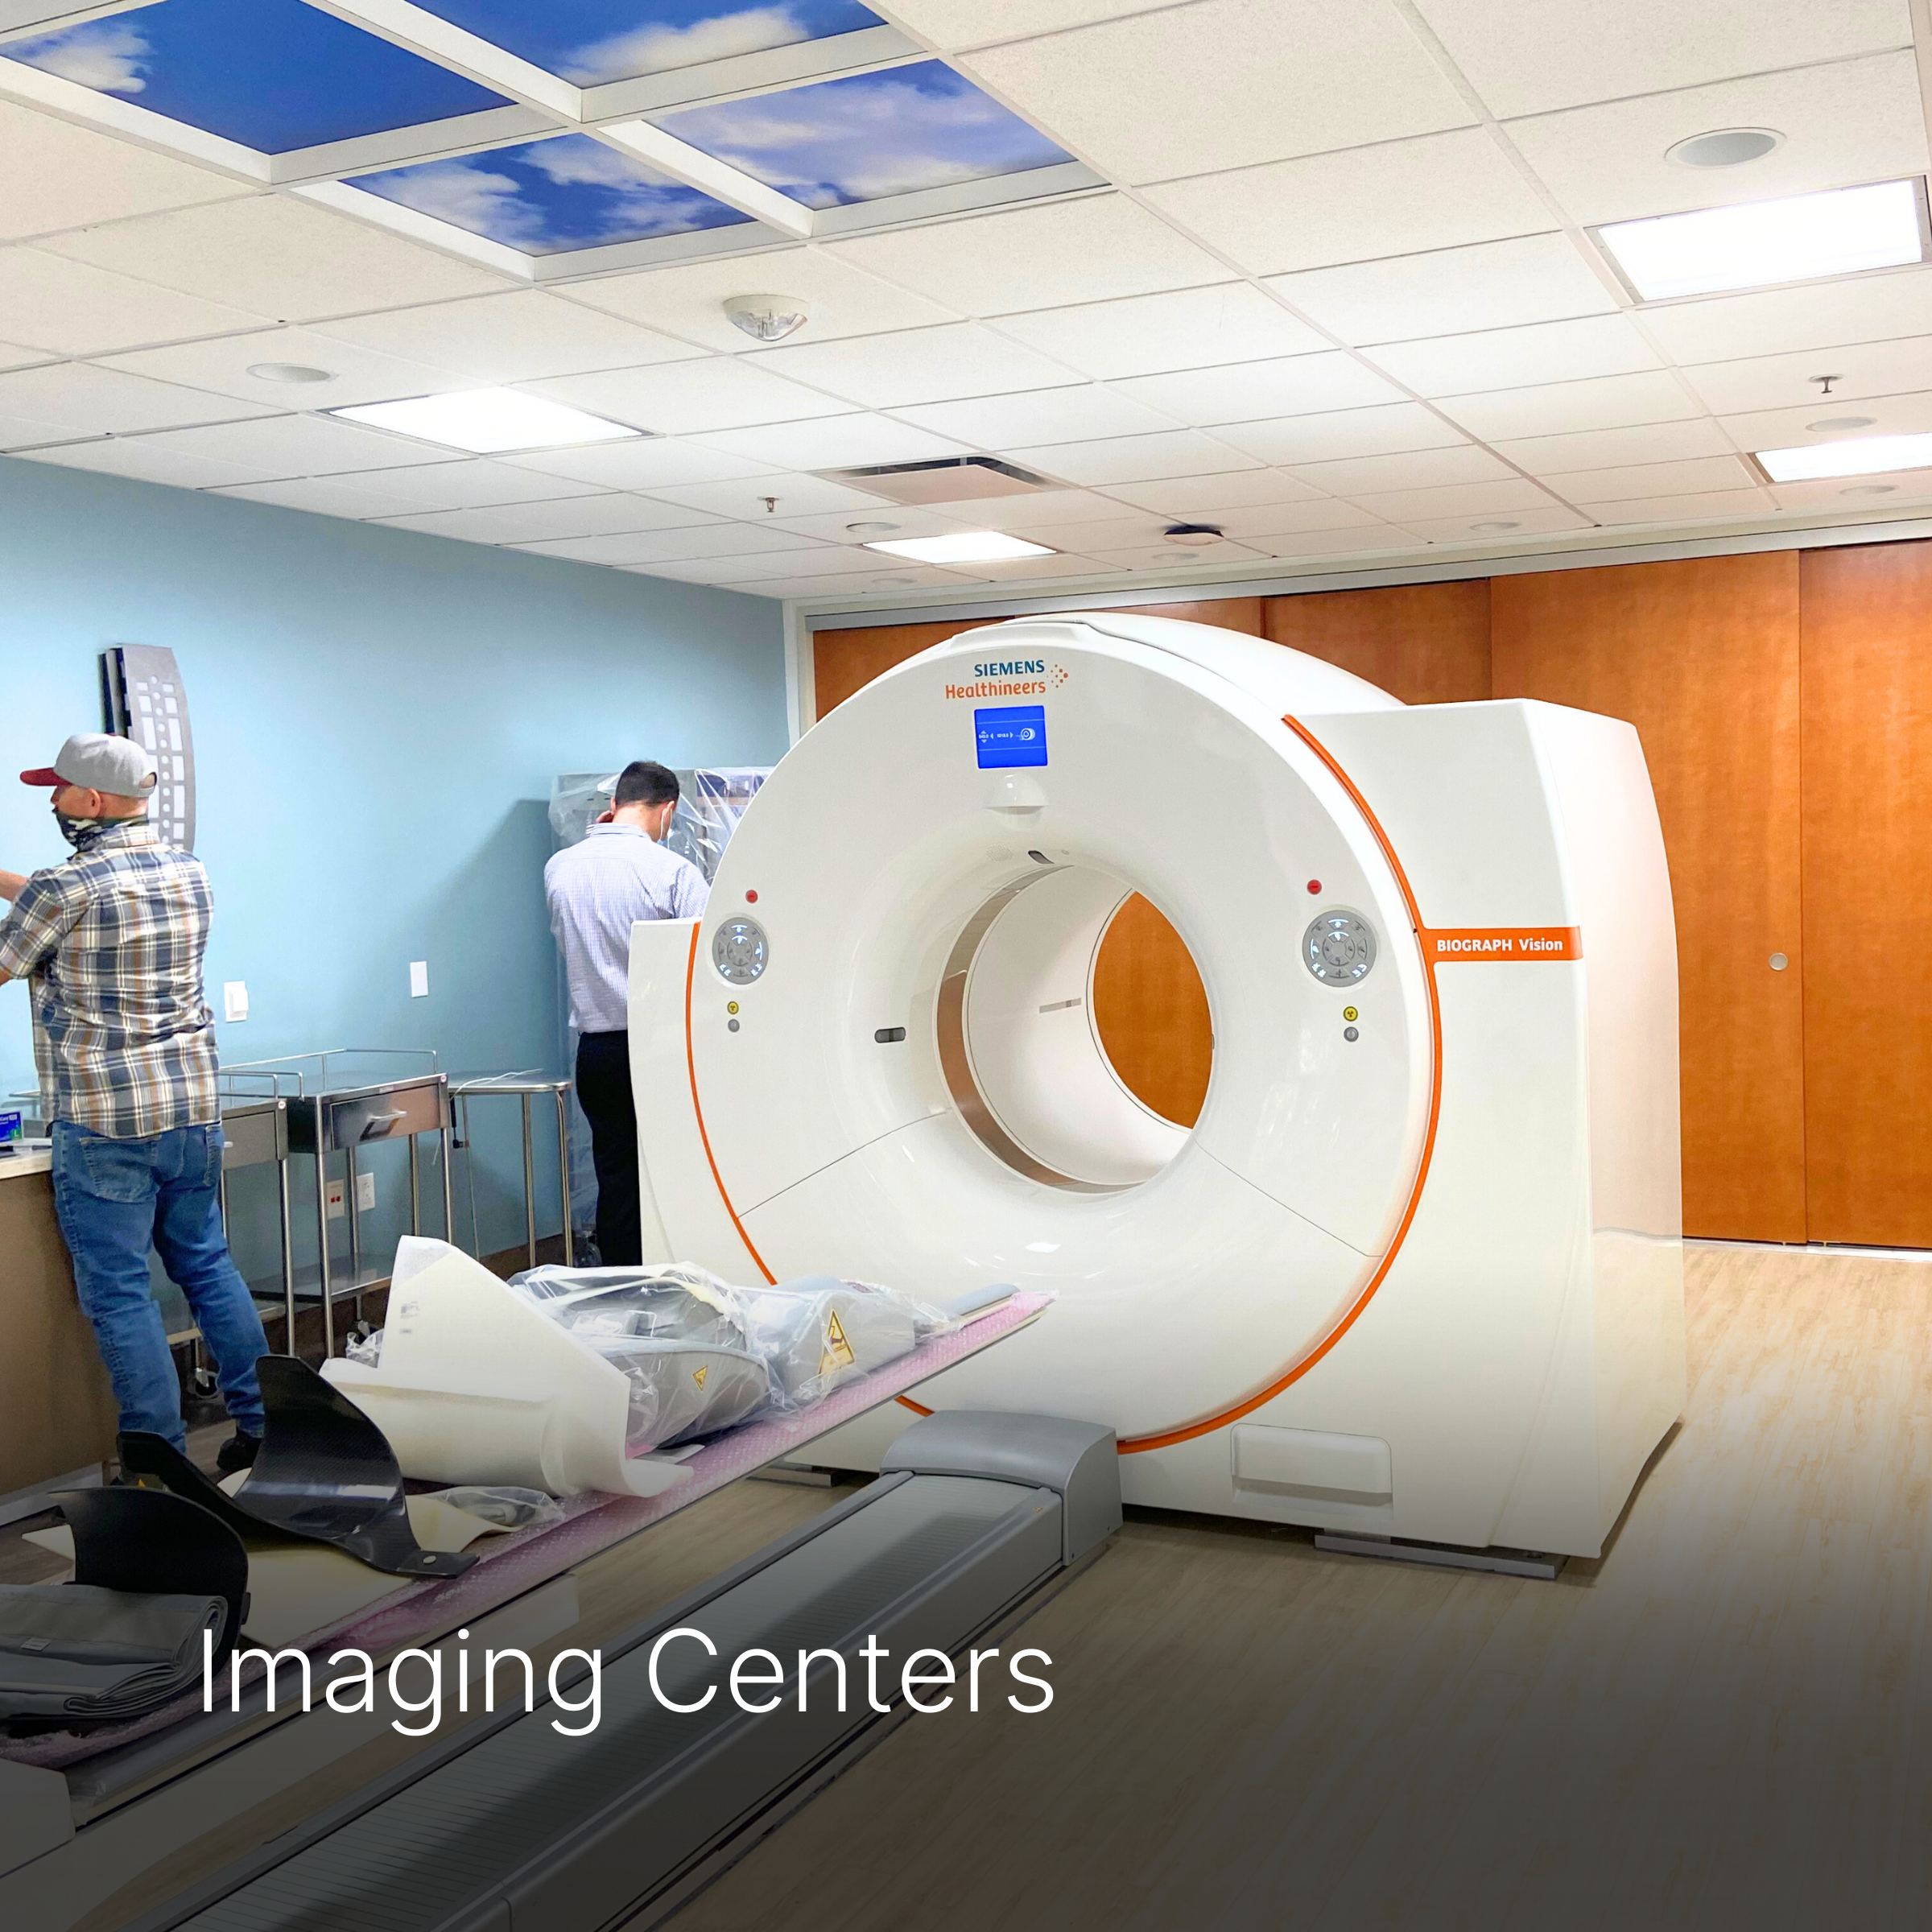 Imaging room with MRI machine and caption of Imaging Centers.